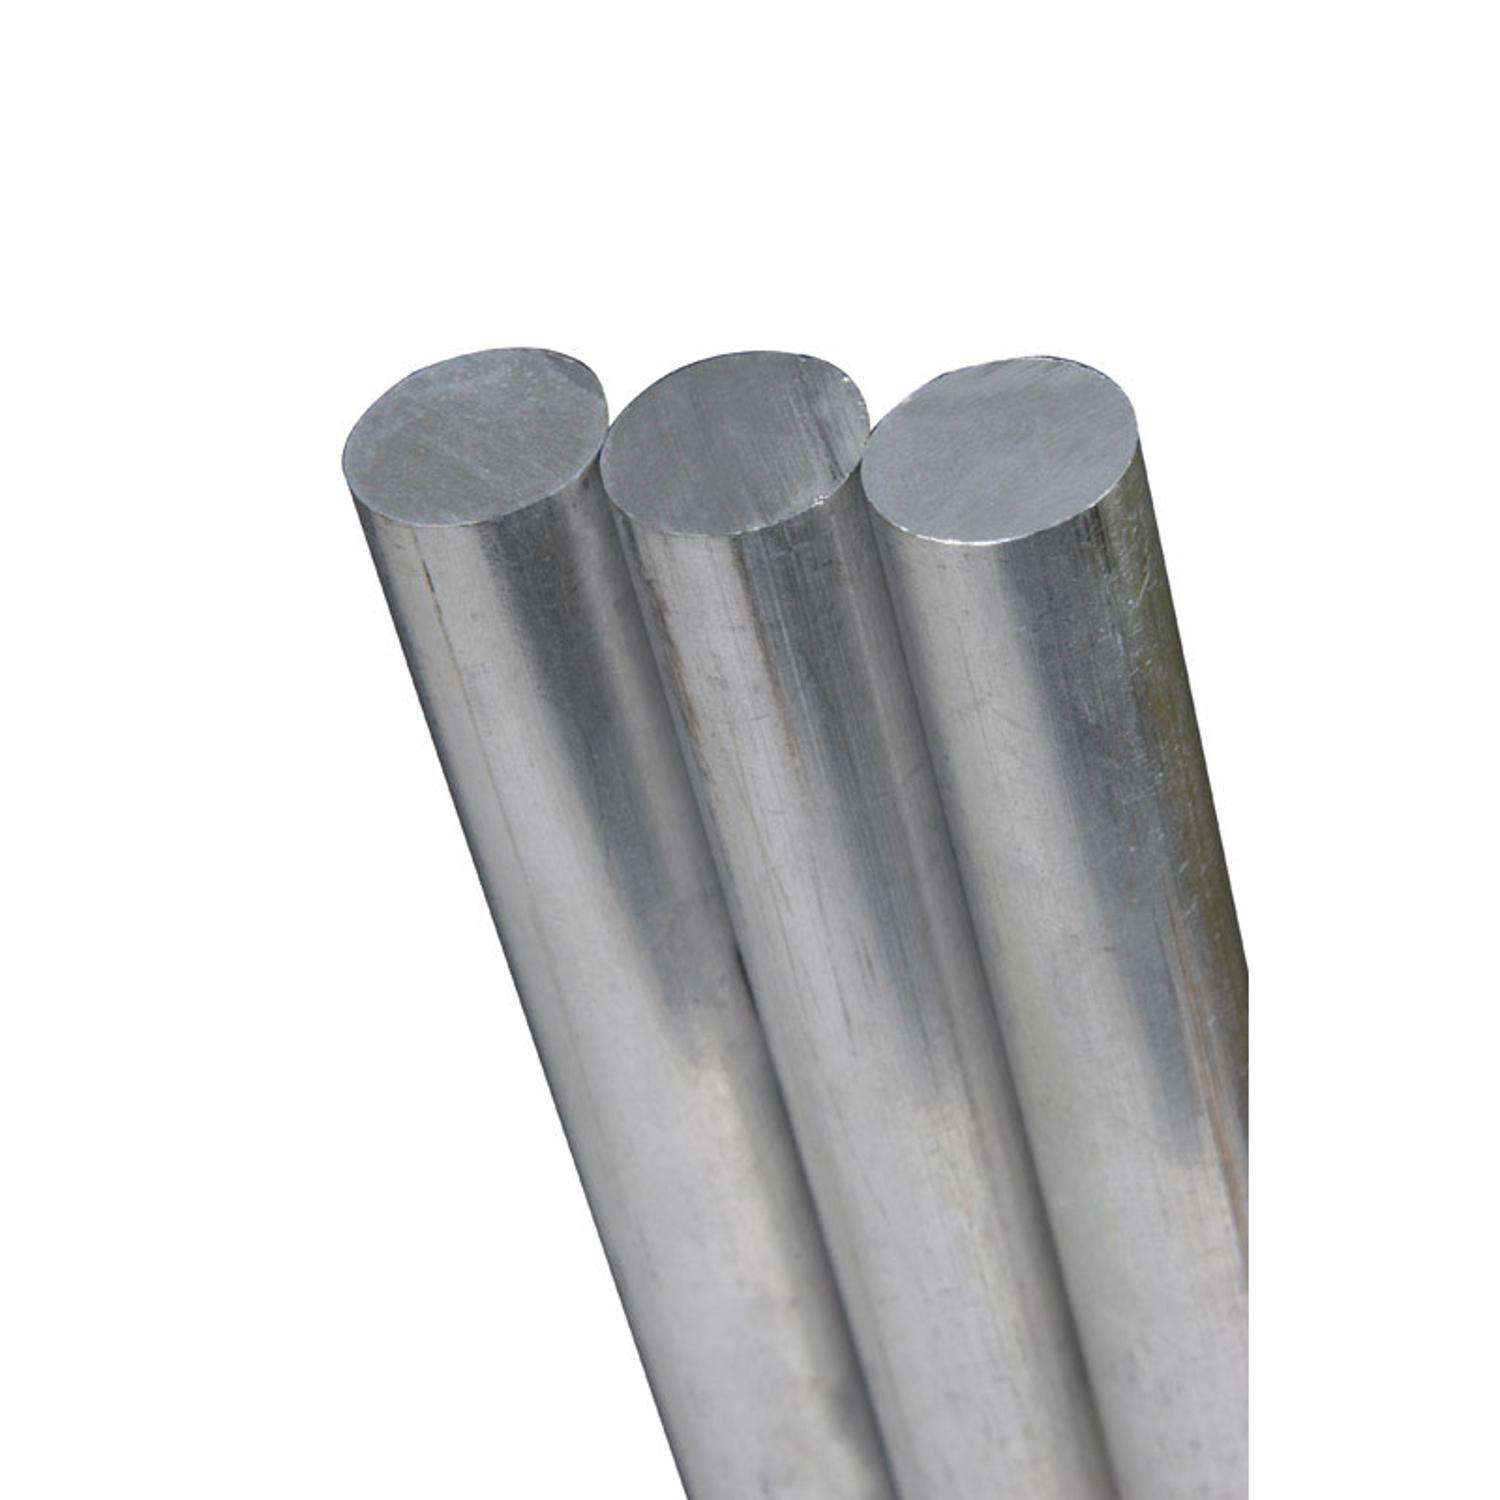 K&S 87135 Stainless Steel Rod, 1/8 x 12